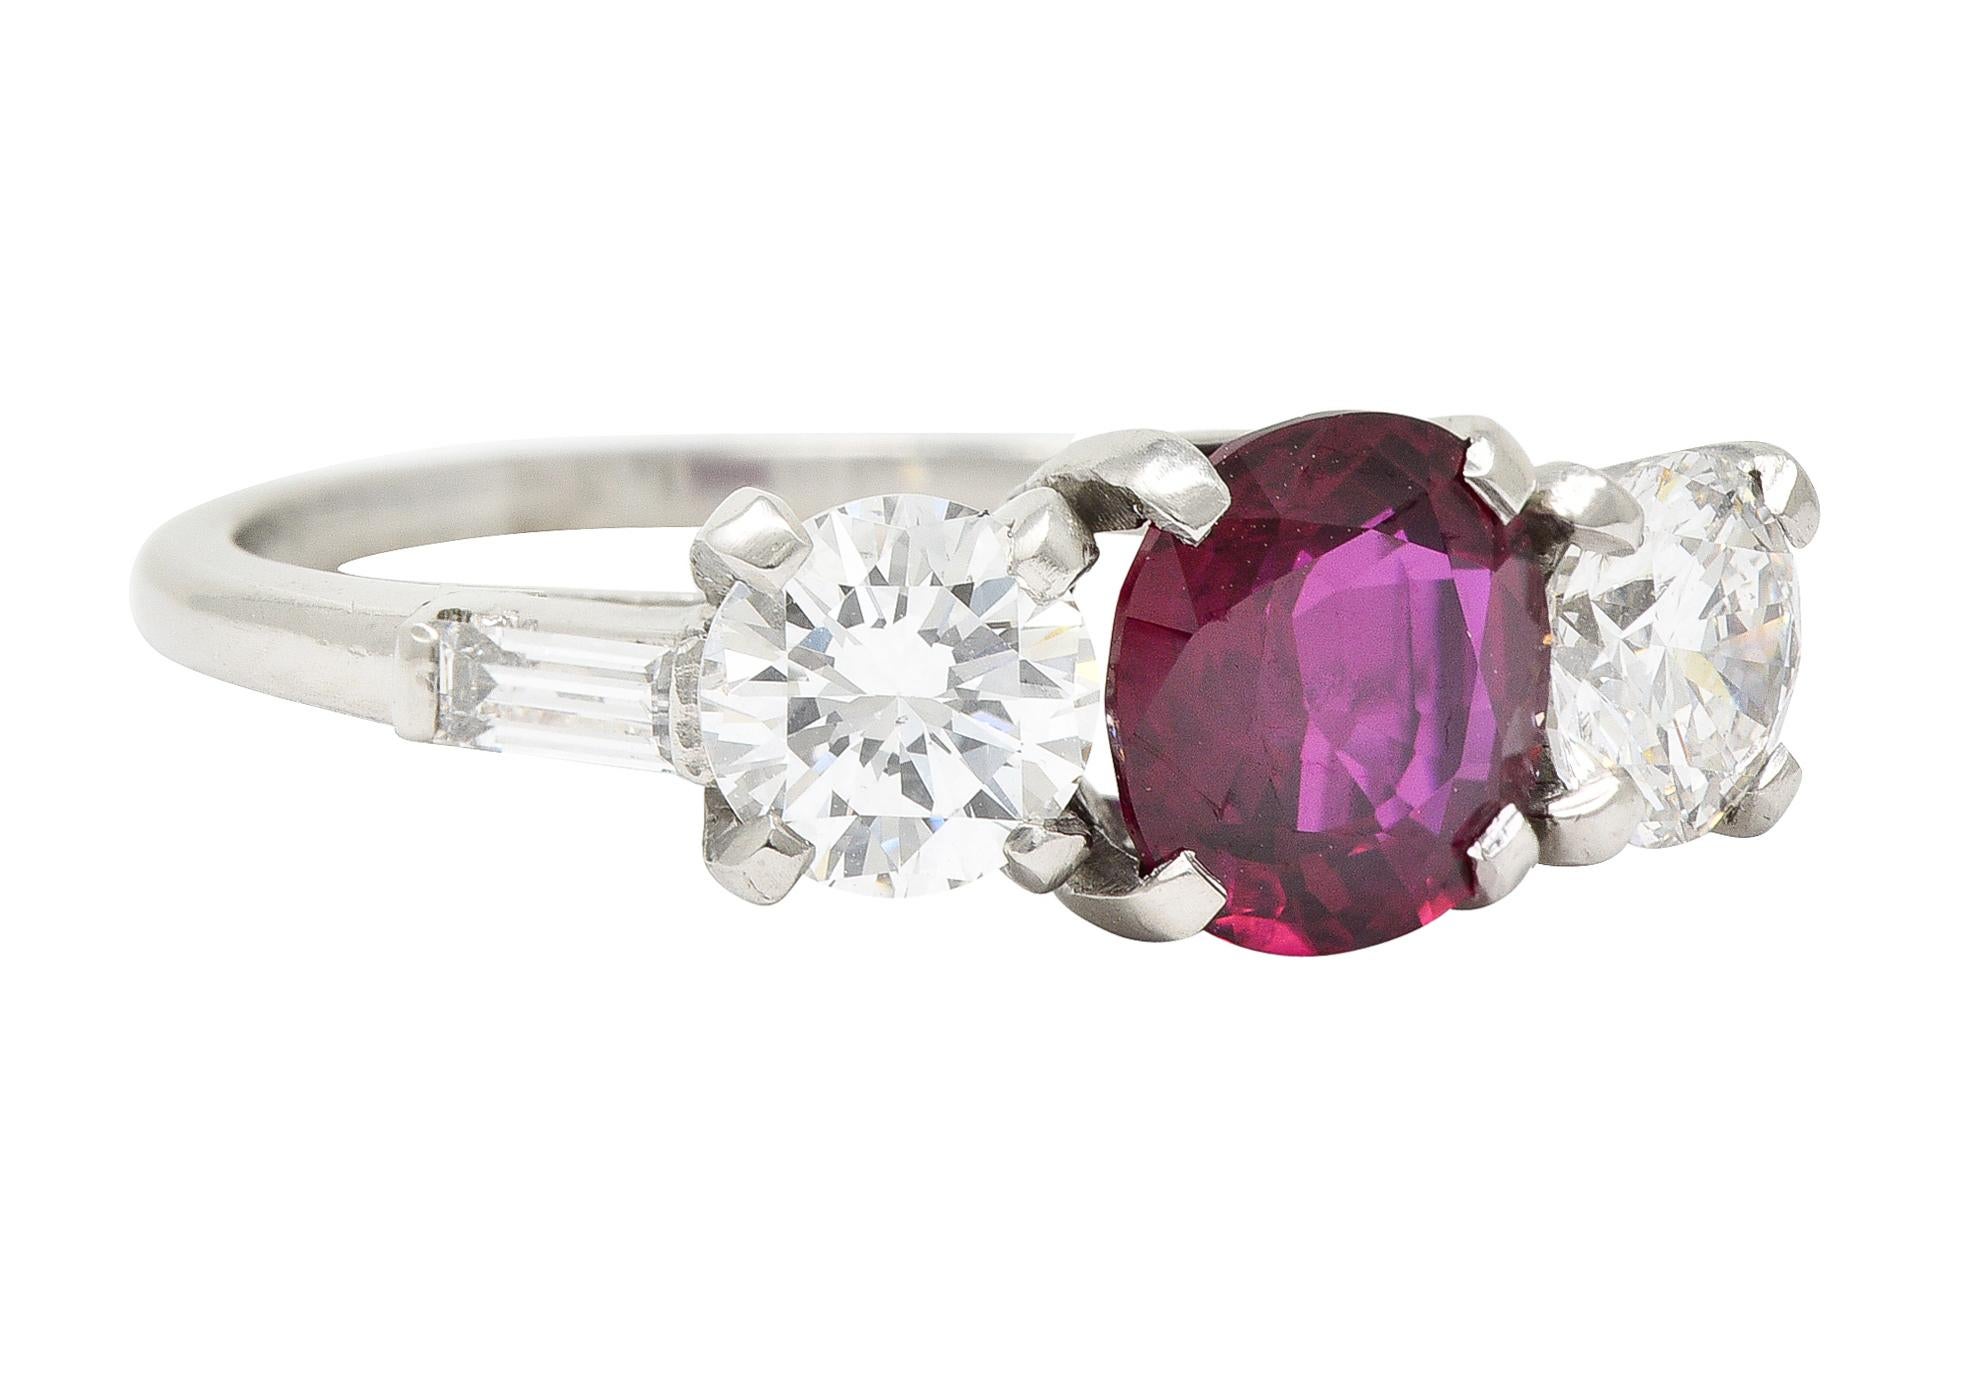 Centering a cushion cut ruby weighing 1.56 carats total - transparent vibrant red in color
Natural Thai in origin with no indications of heat treatment - prong set in basket
Flanked by two round brilliant cut diamonds prong set in baskets
Weighing